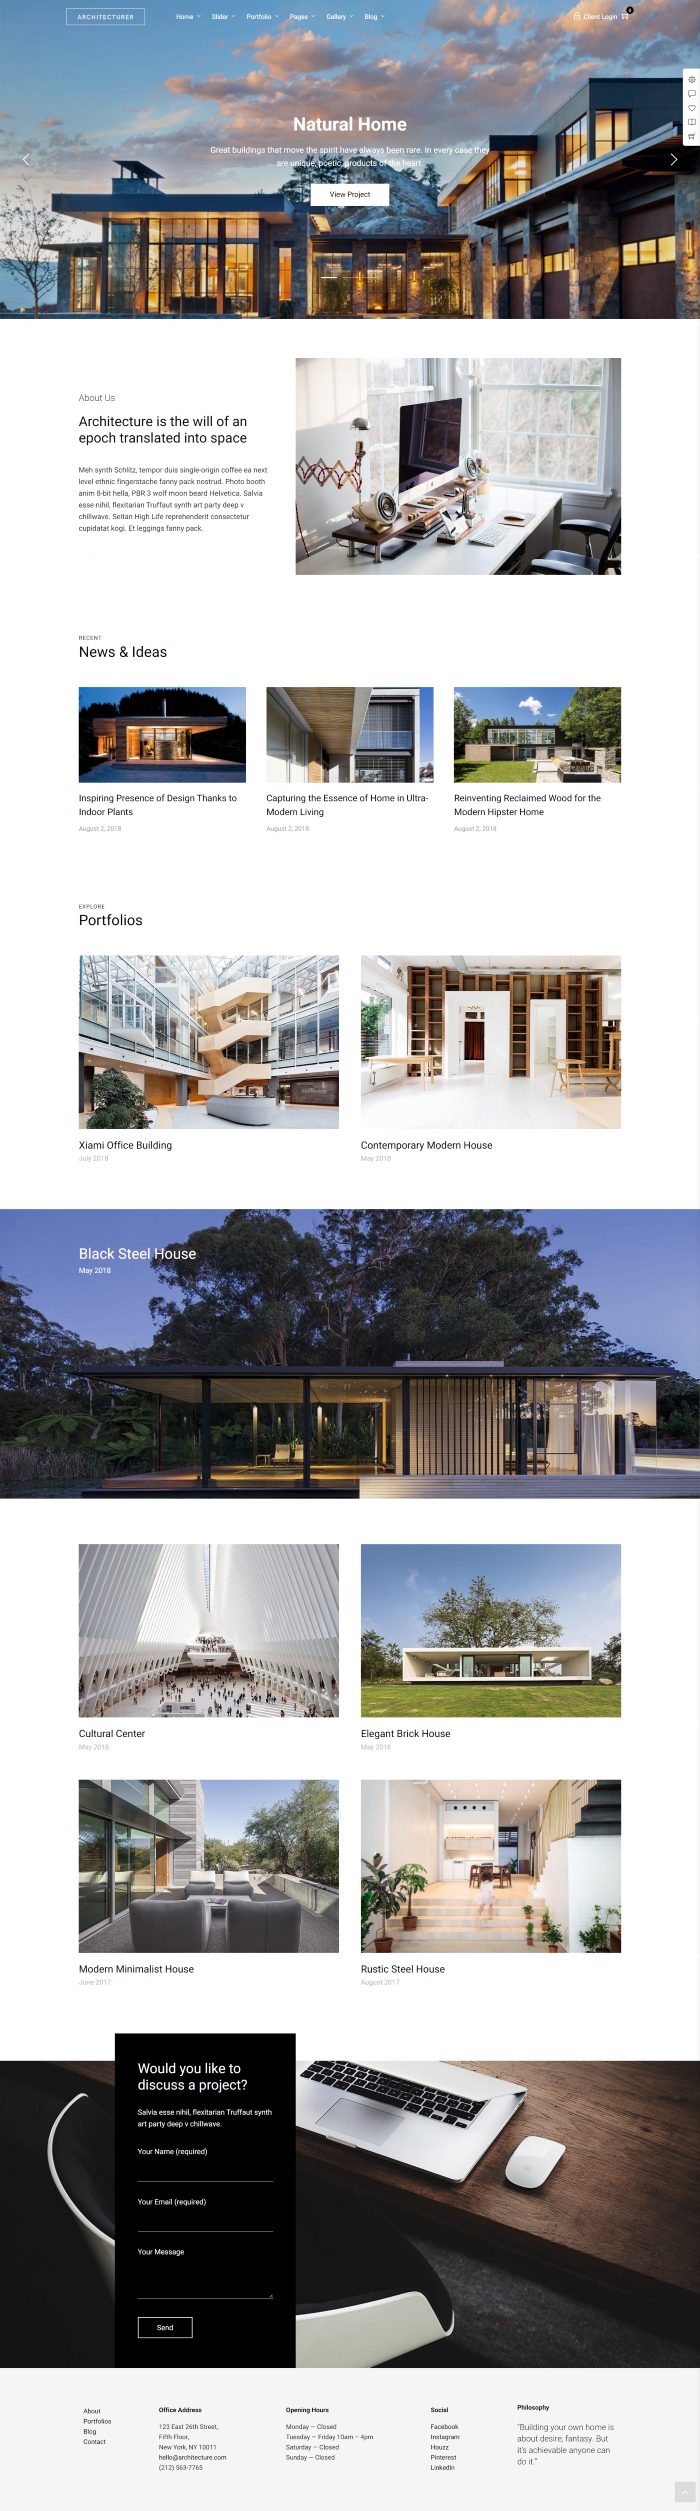 Mẫu website thiết kế xây dựng - architecturer home 2